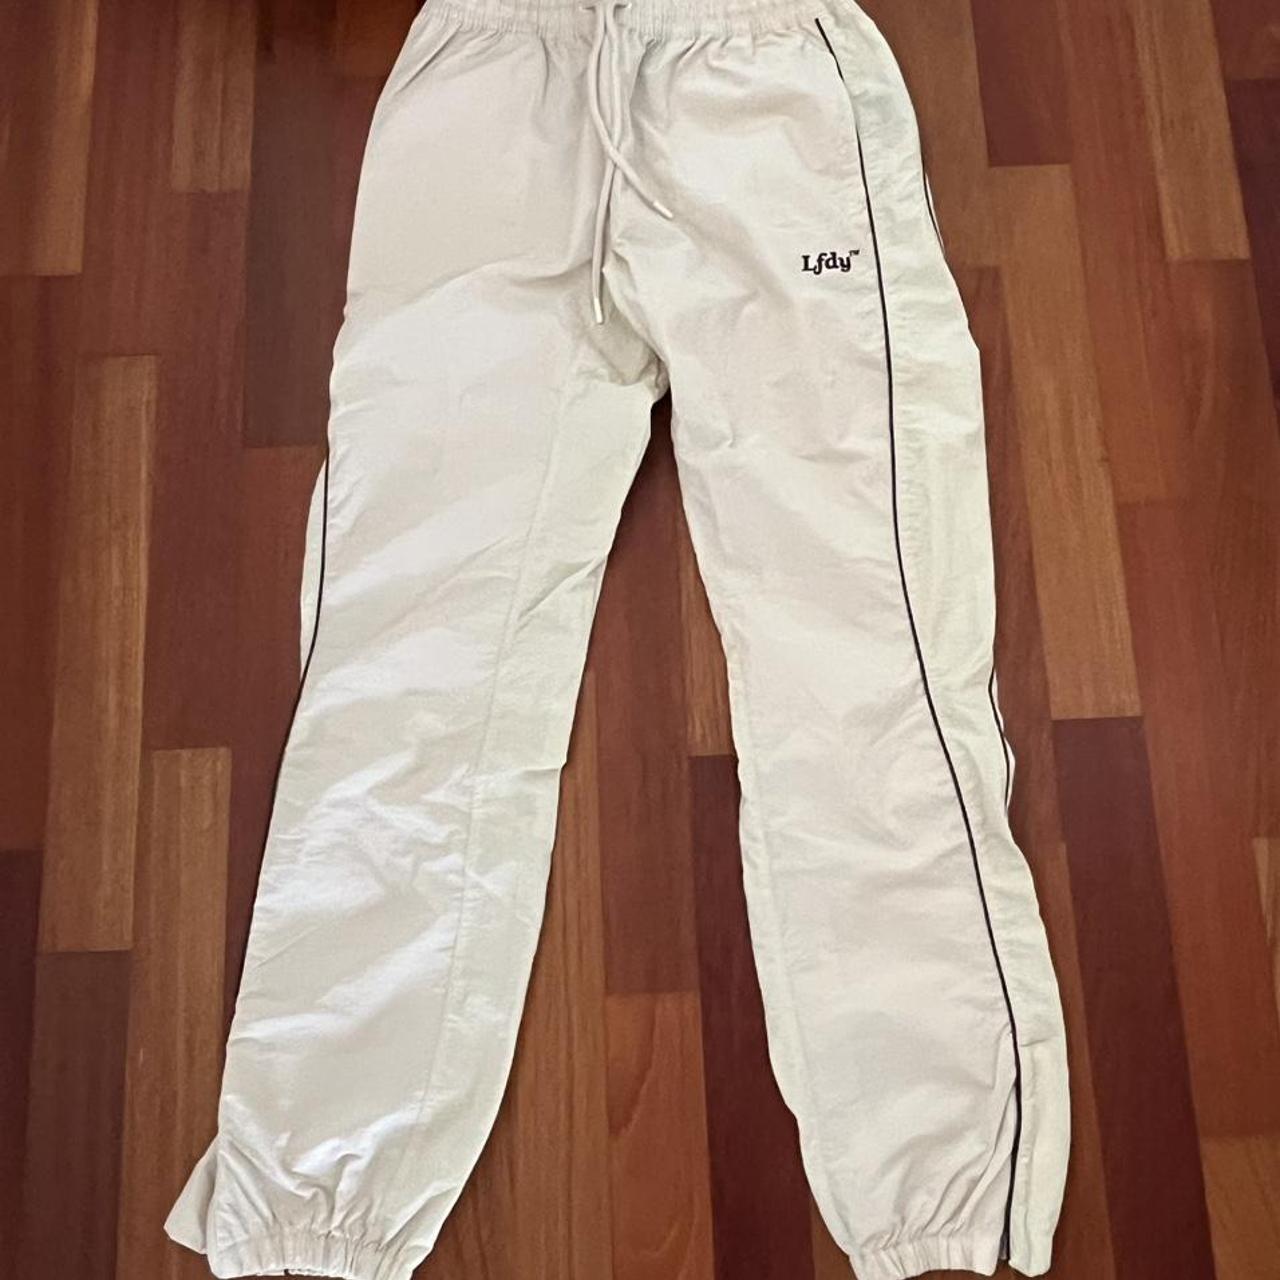 Beige Lfdy Trackpants Cond: Perfect Size:M - Depop